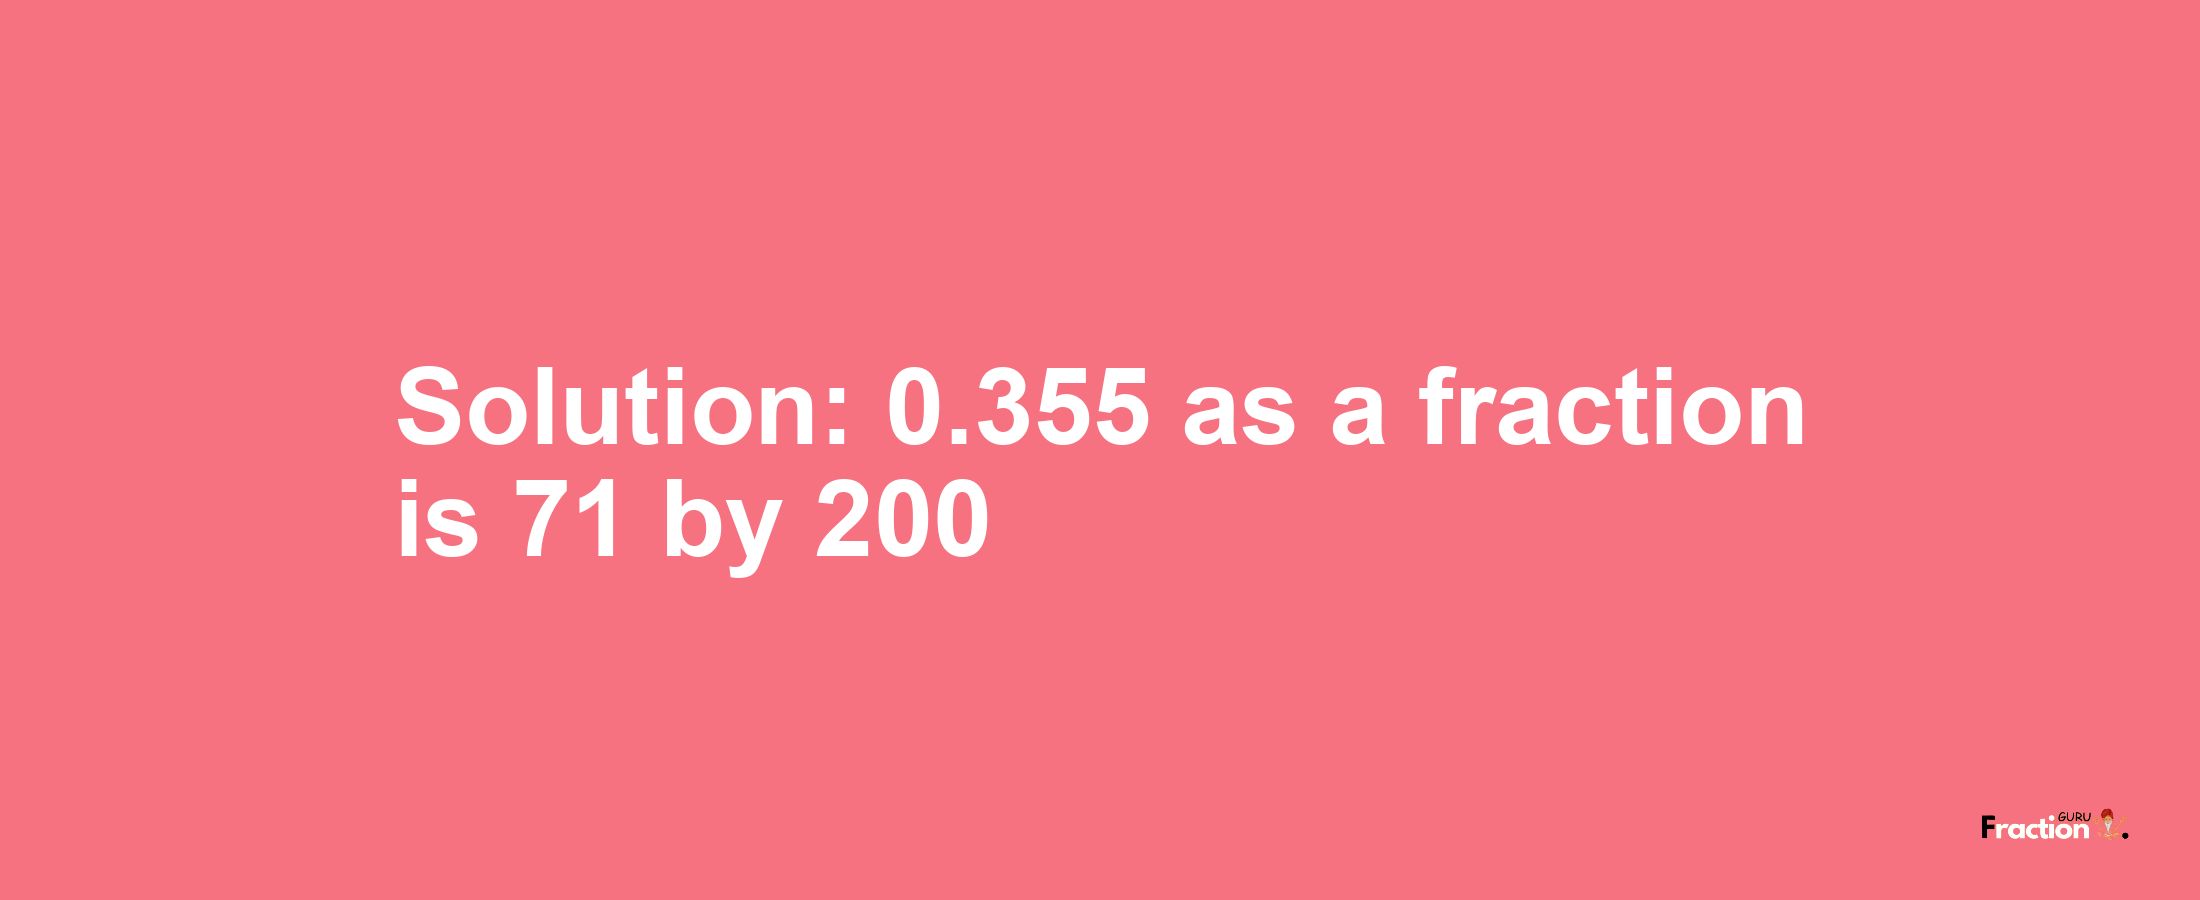 Solution:0.355 as a fraction is 71/200